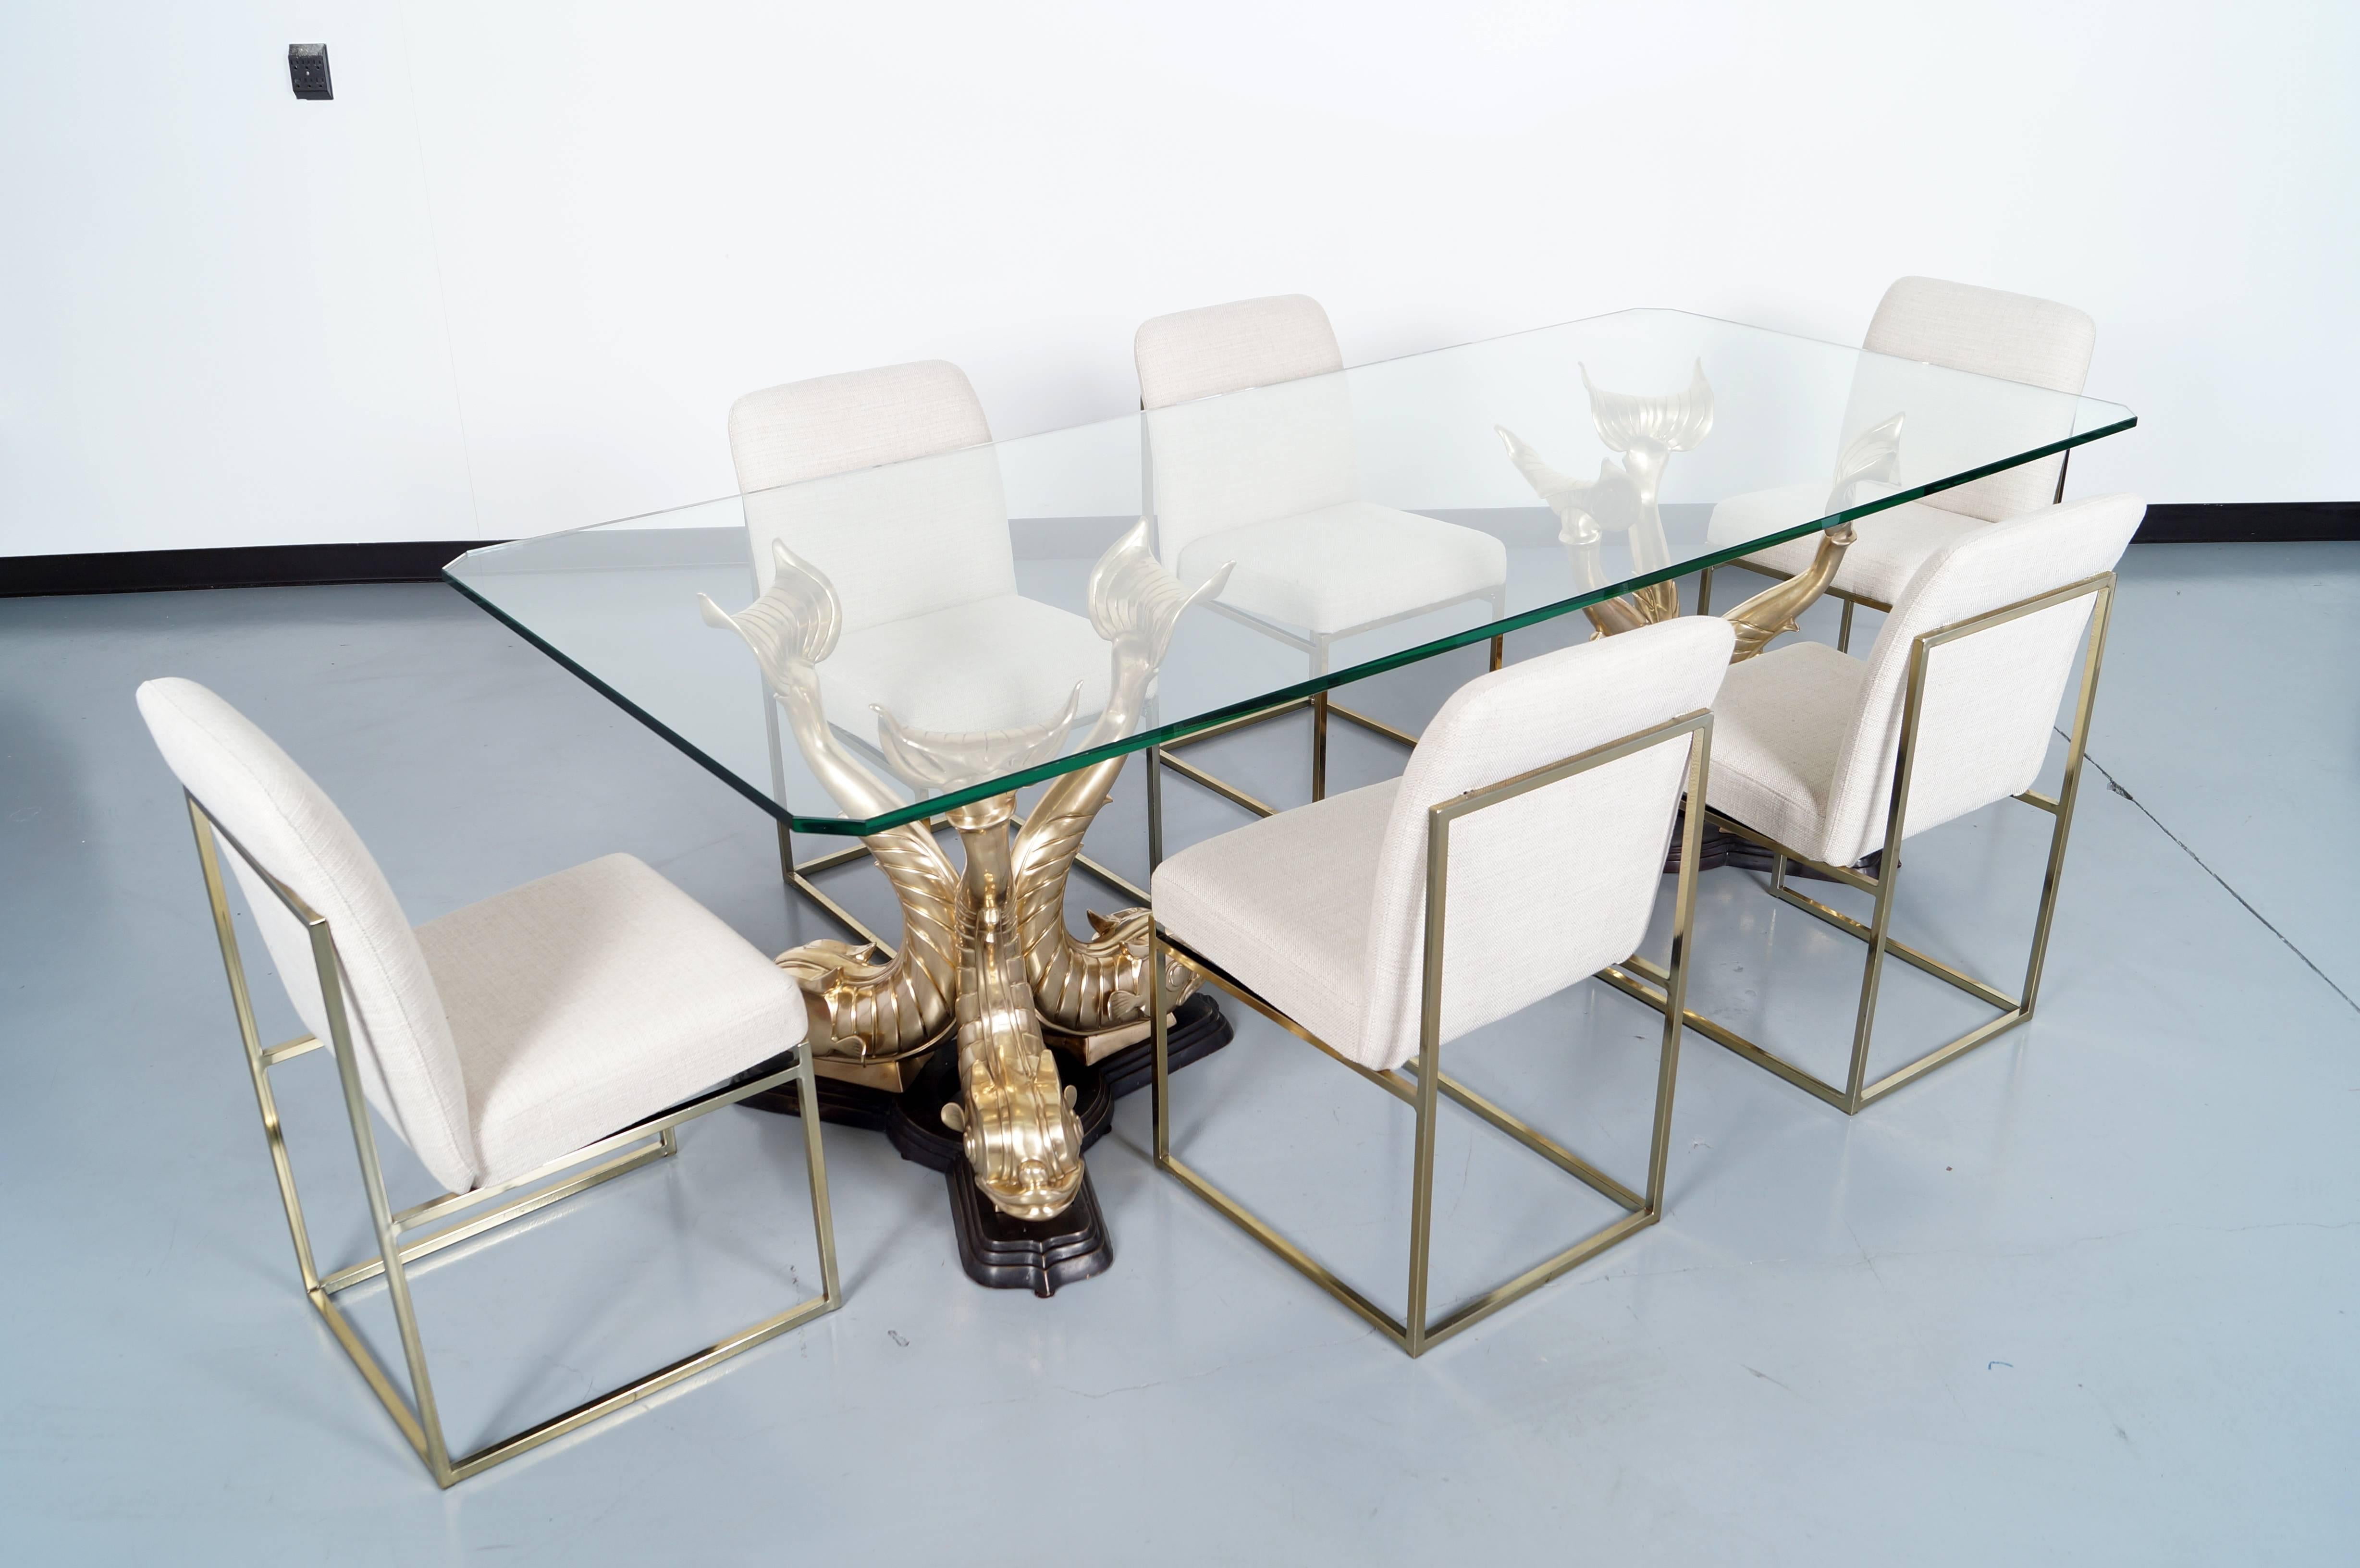 Exceptional vintage Italian koi fish dining table or conference table manufactured in Italy, circa 1970s. This beautiful table features two extremely sturdy bronze bases that are sculpted in a beautiful koi Fish Design, the detailing on the